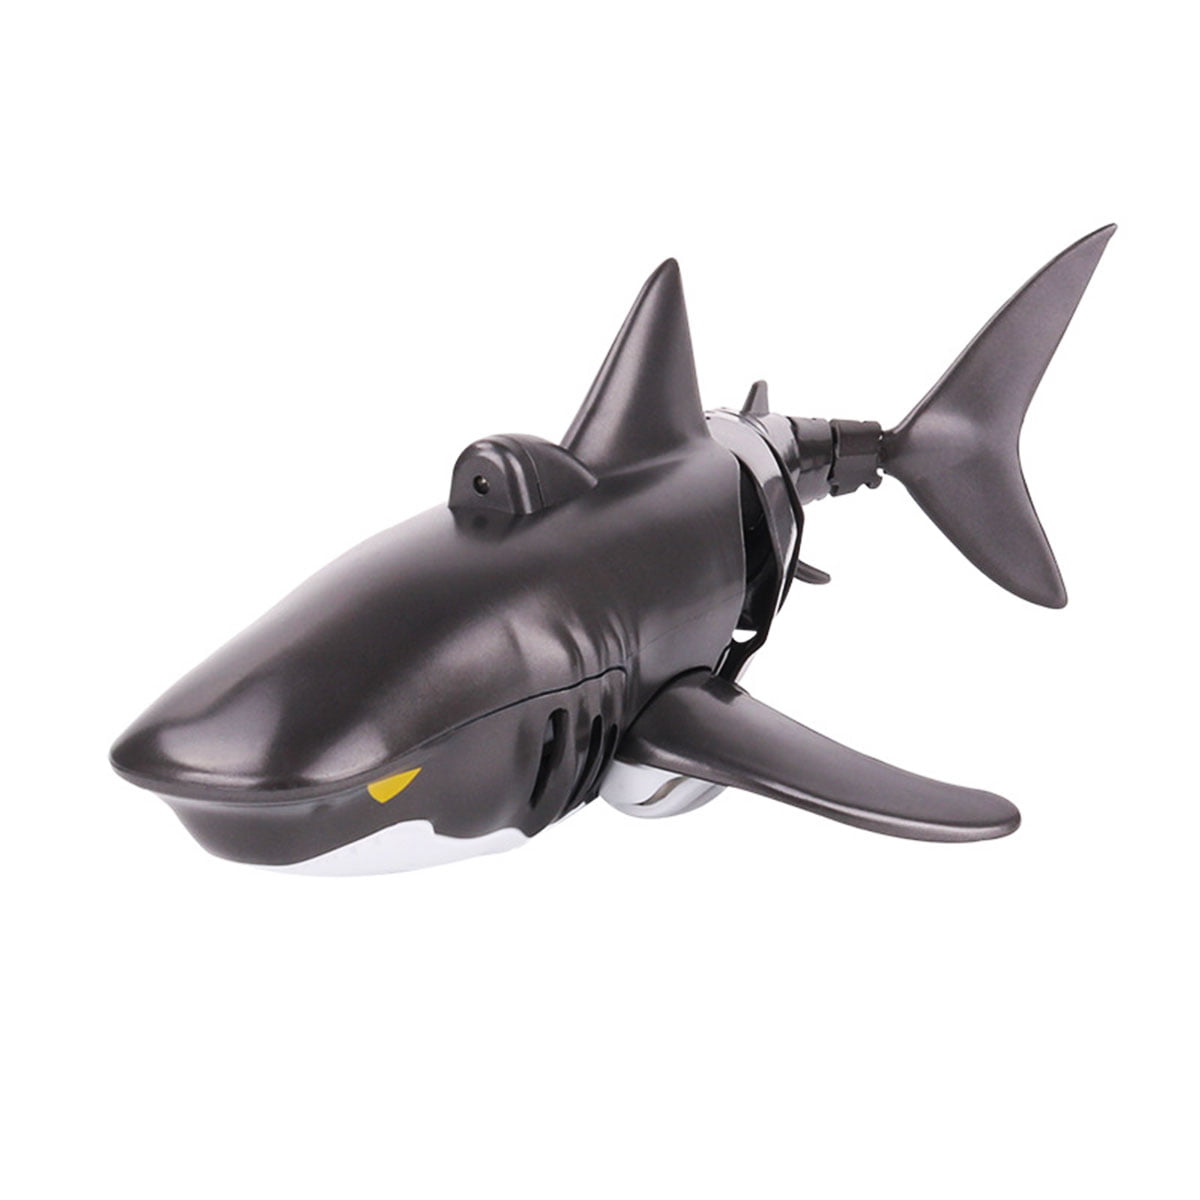 Rechargeable Electric Toy RC Shark RC Shark Fish Boat Submarine for Swimming Pool Bathroom Toy N/Y Remote Control Shark 2.4G Simulation Remote Control Boat Toy 